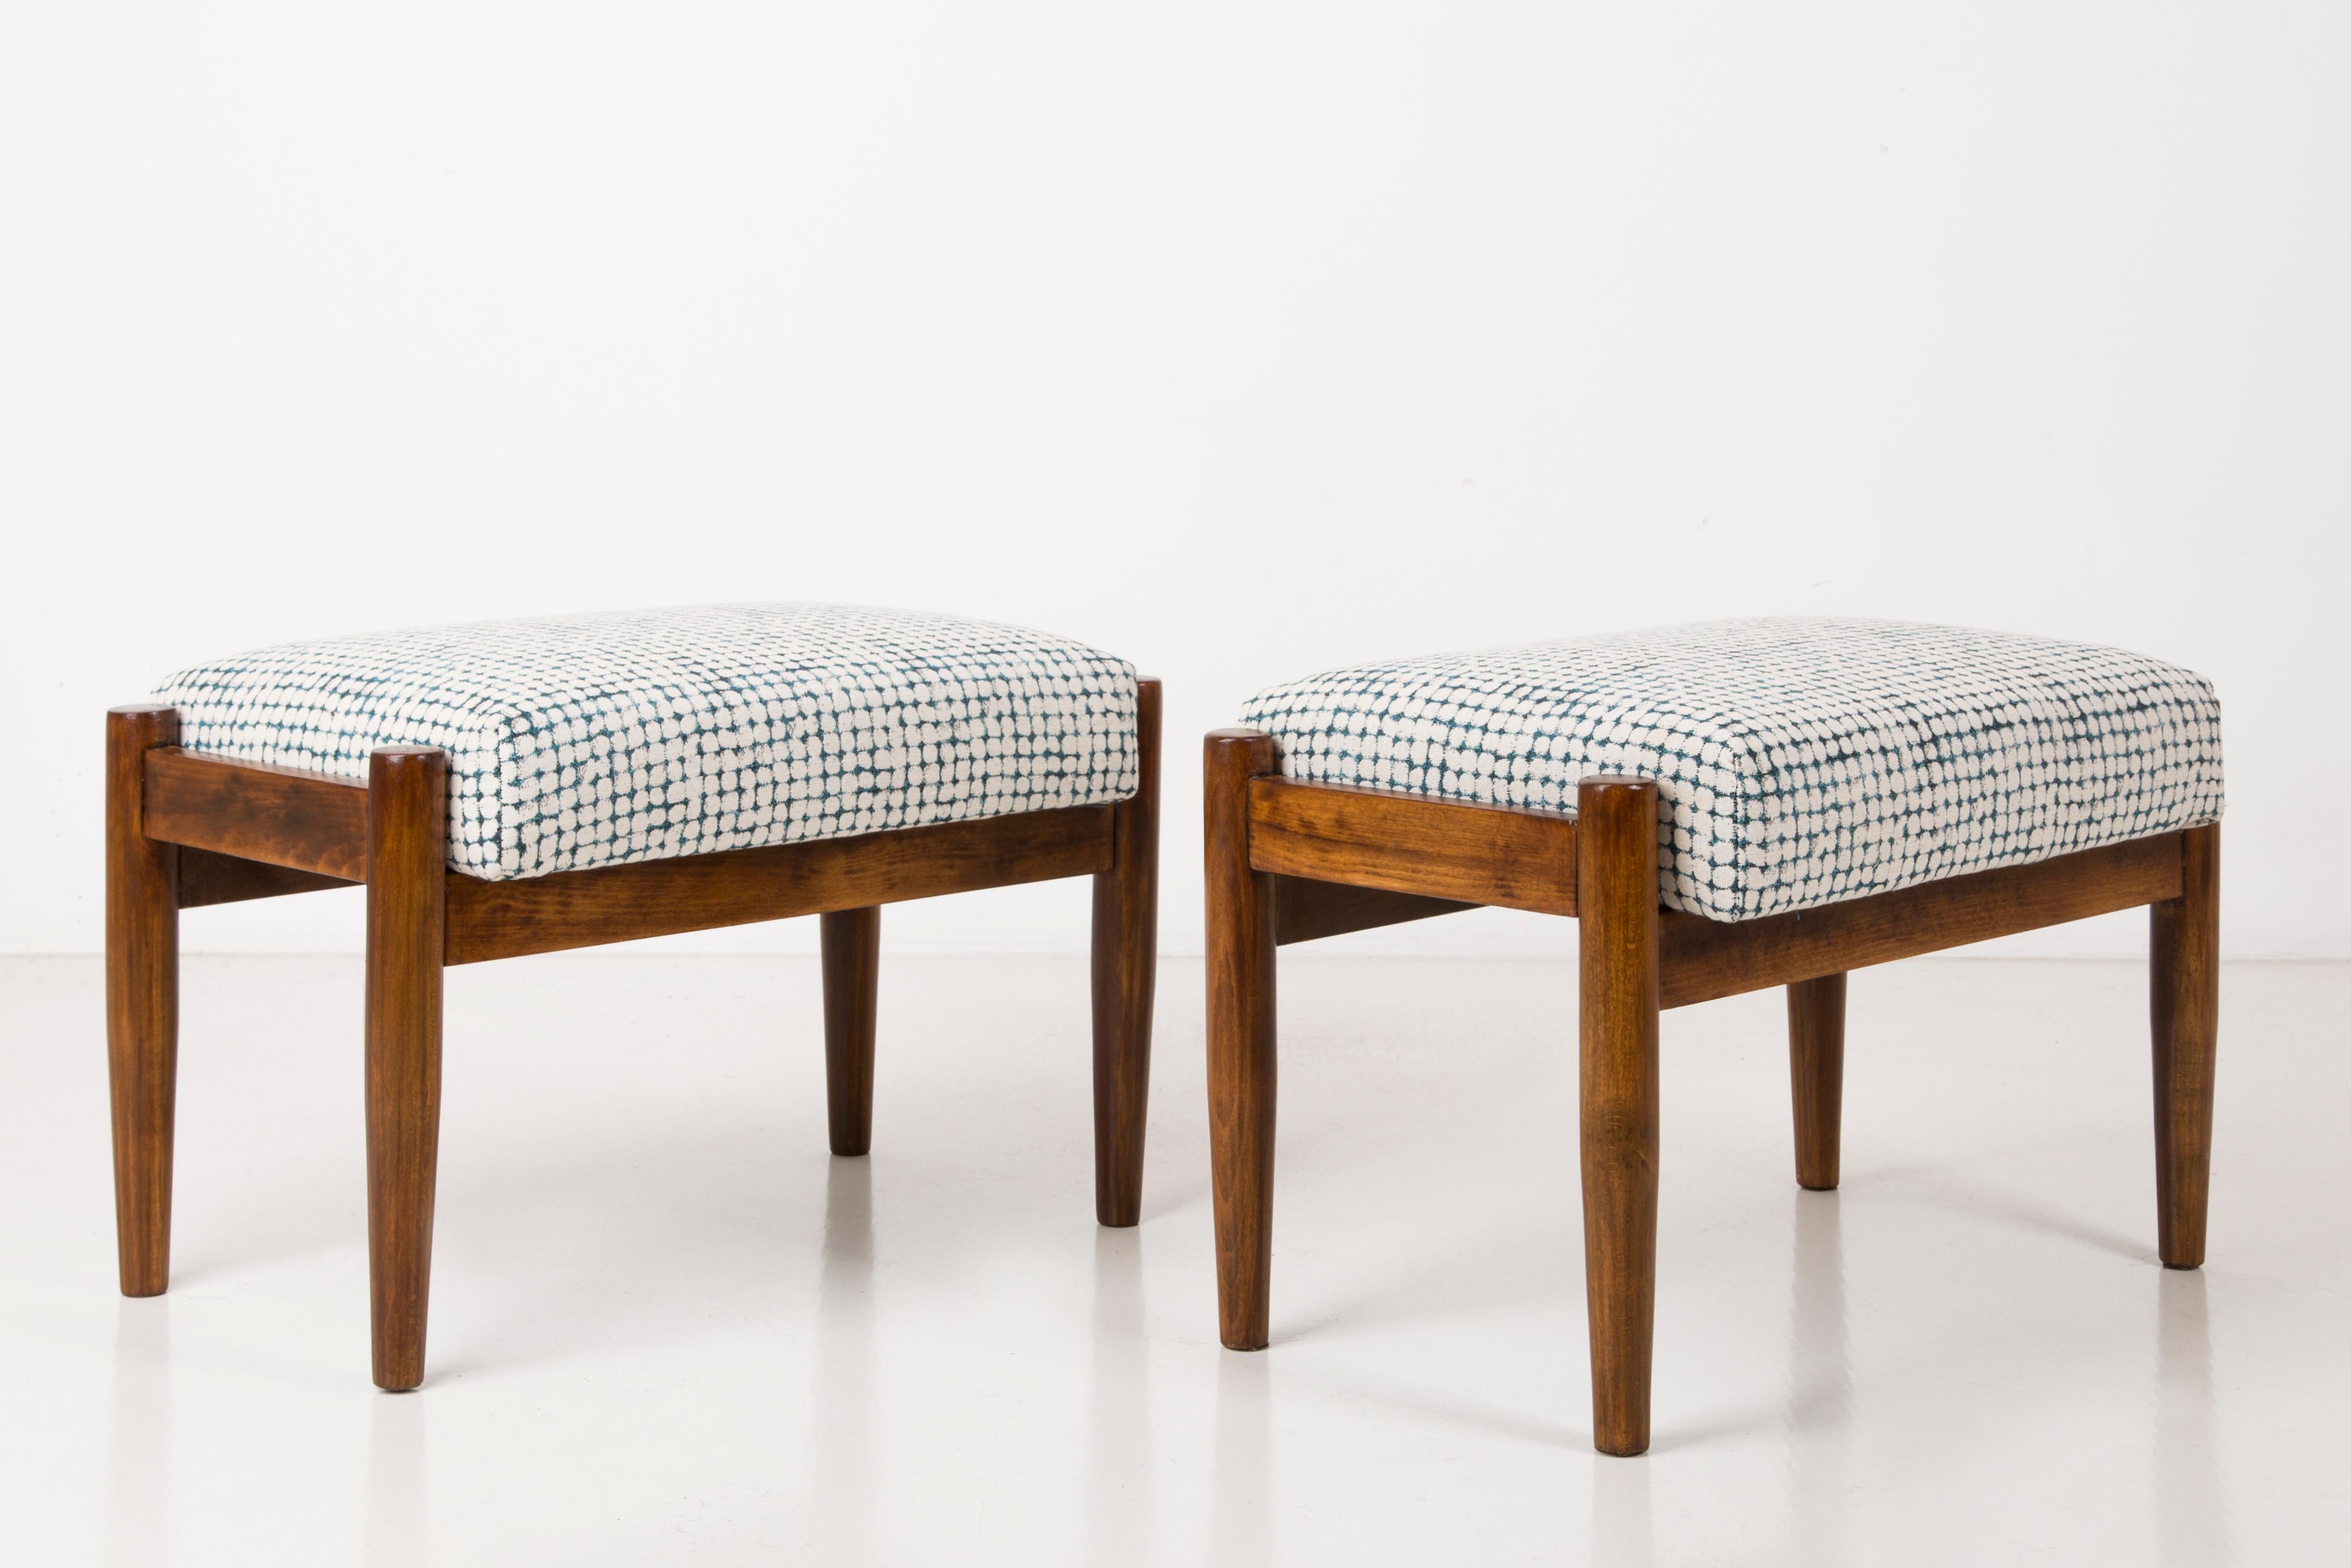 Stools from the turn of the 1960s. Beautiful white and aqua high quality upholstery. The stools consists of an upholstered part, a seat and wooden legs narrowing downwards, characteristic of the 1960s style. We can prepare this stools also in